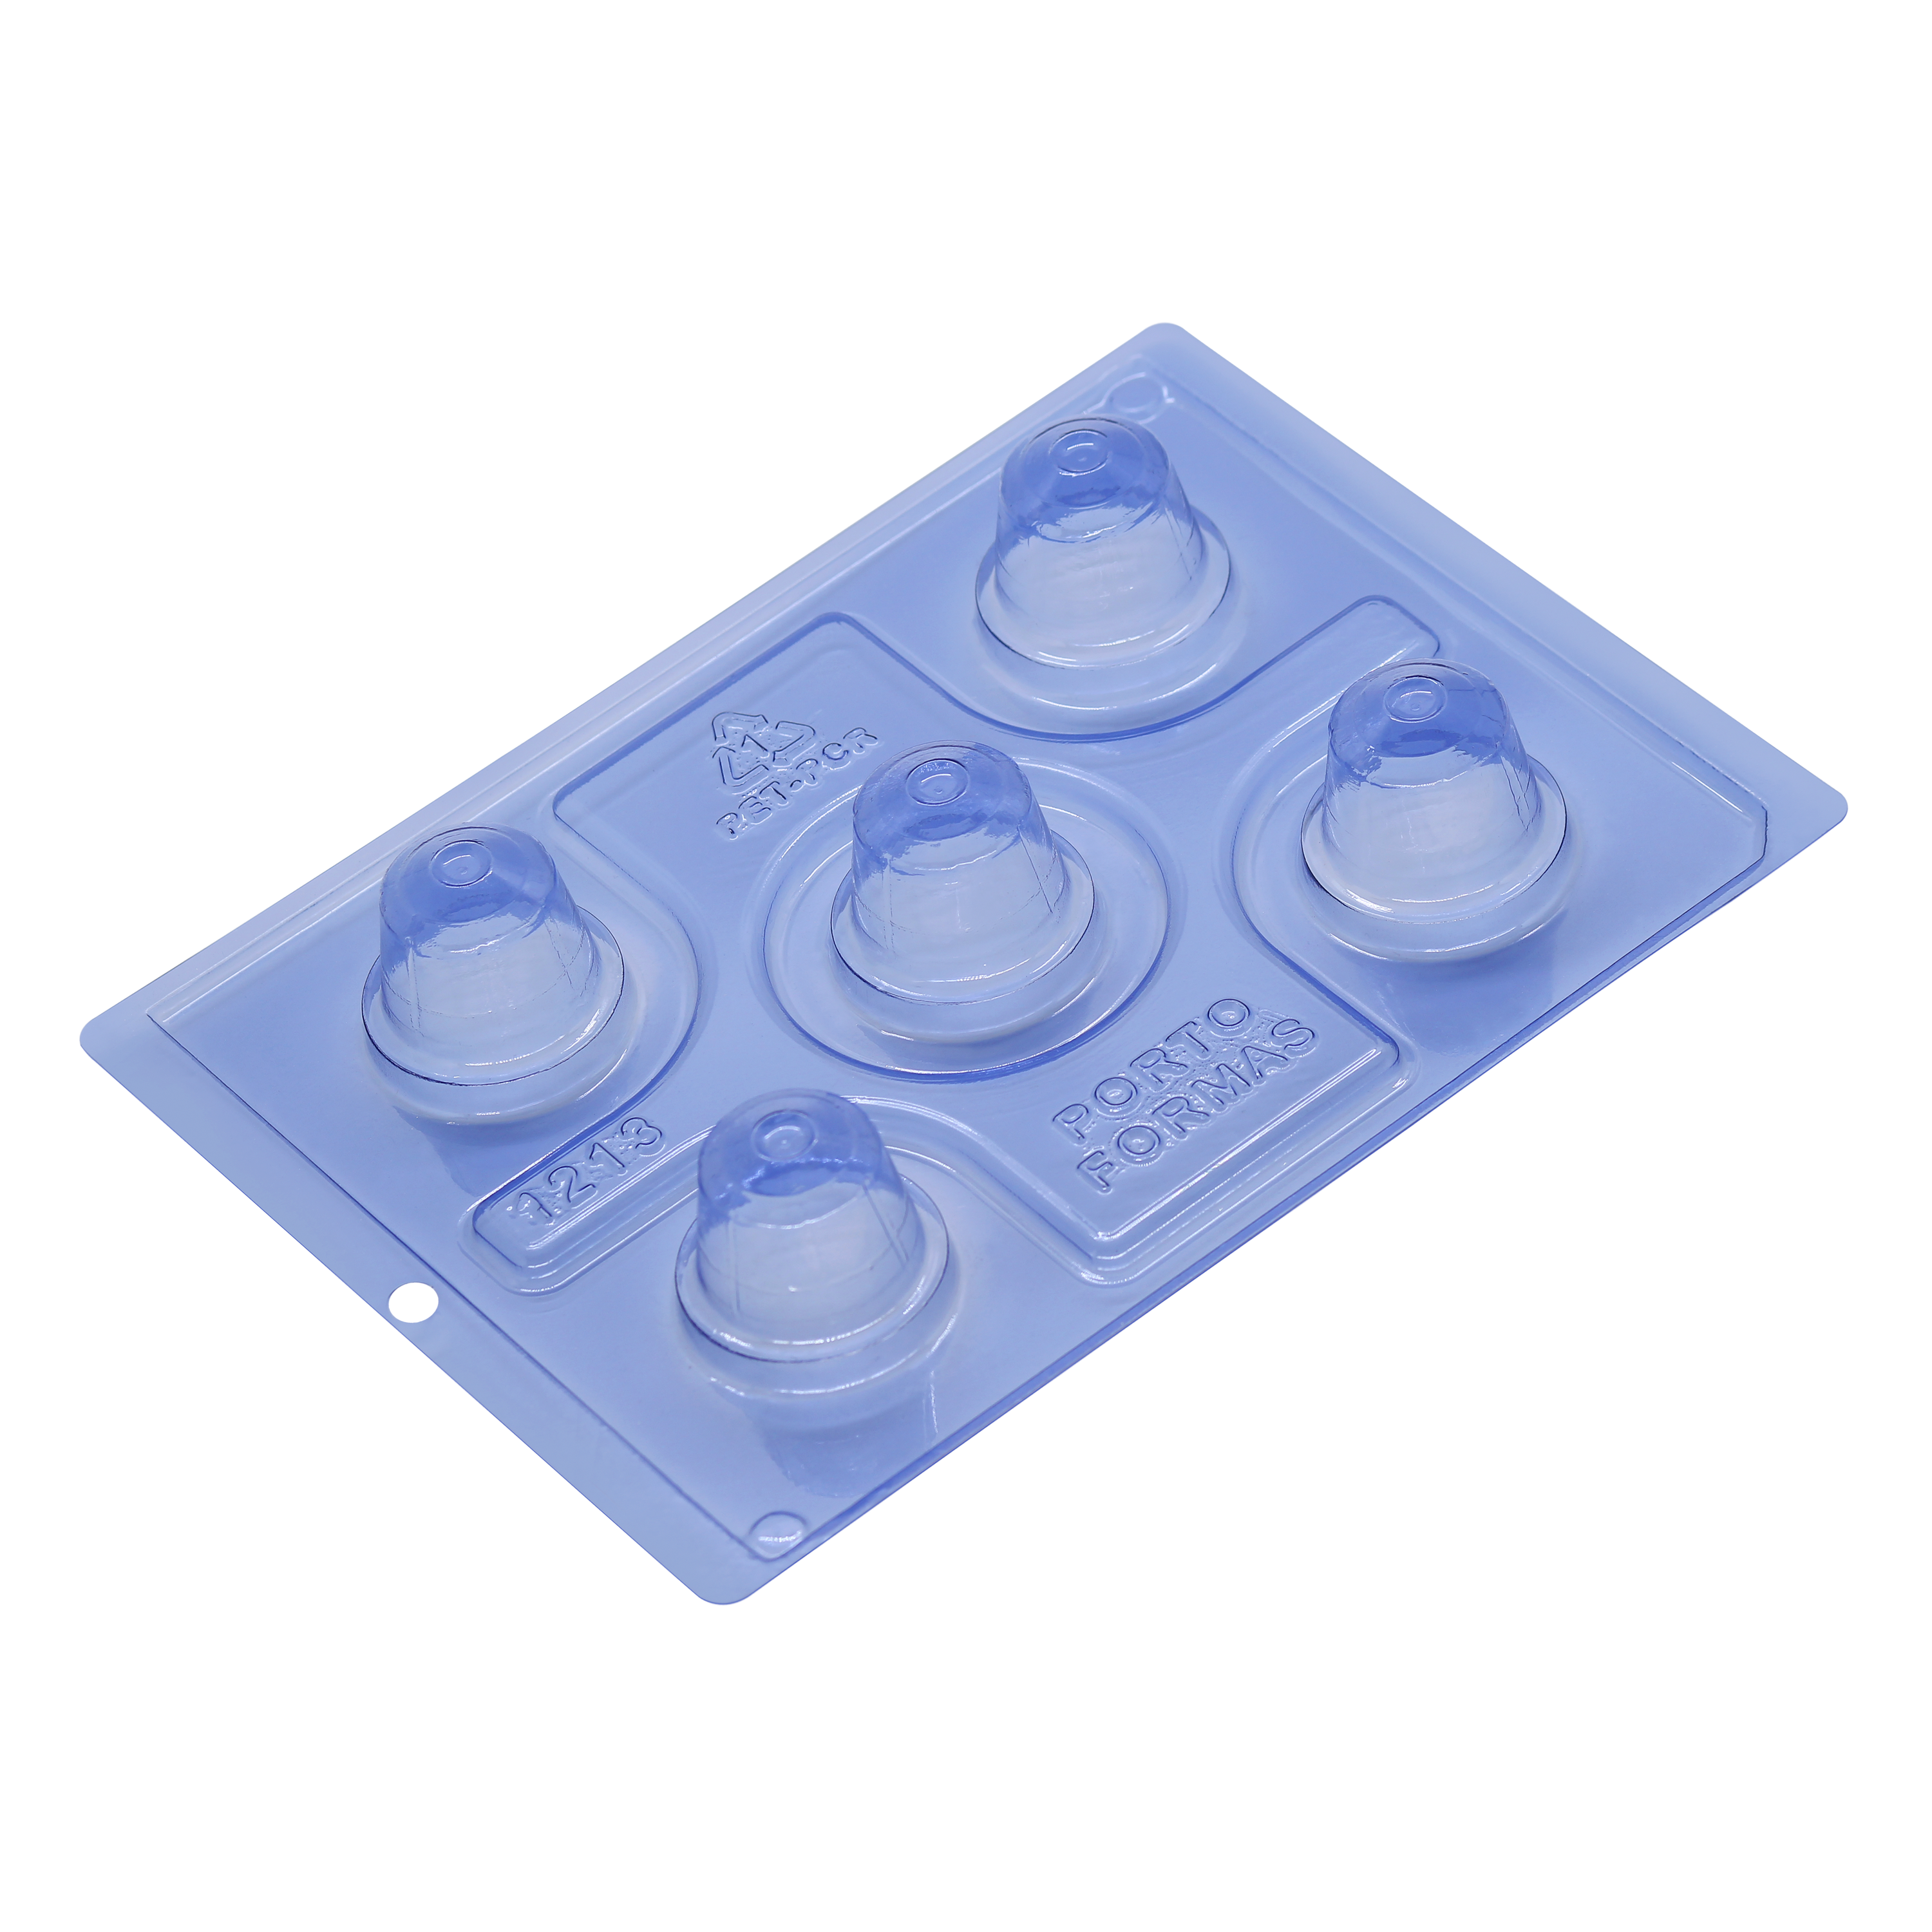 COFFEE CAPSULES Chocolate Mould